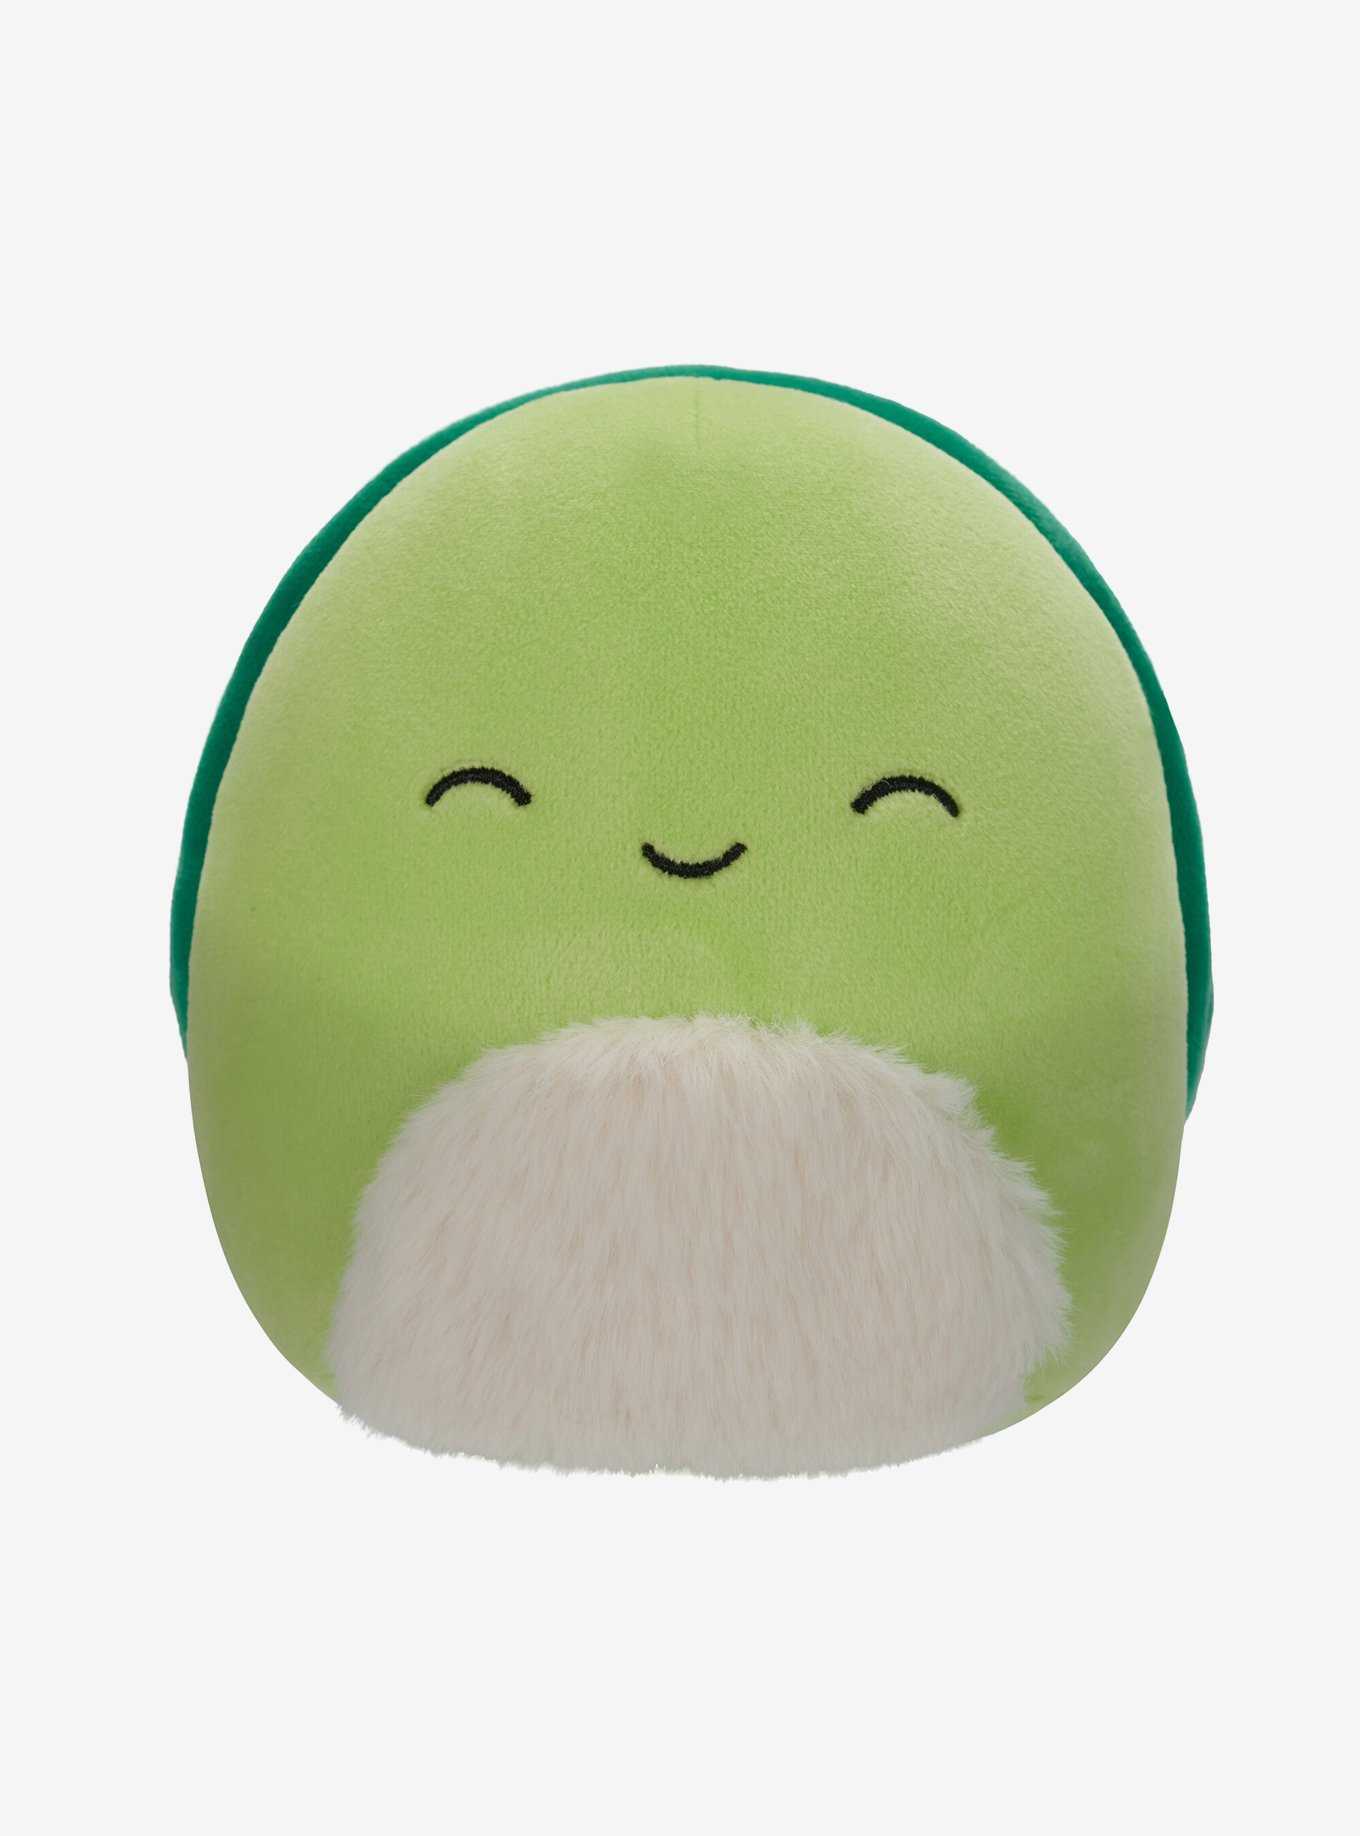 Squishmallows Everyday Assorted Blind Plush, , hi-res